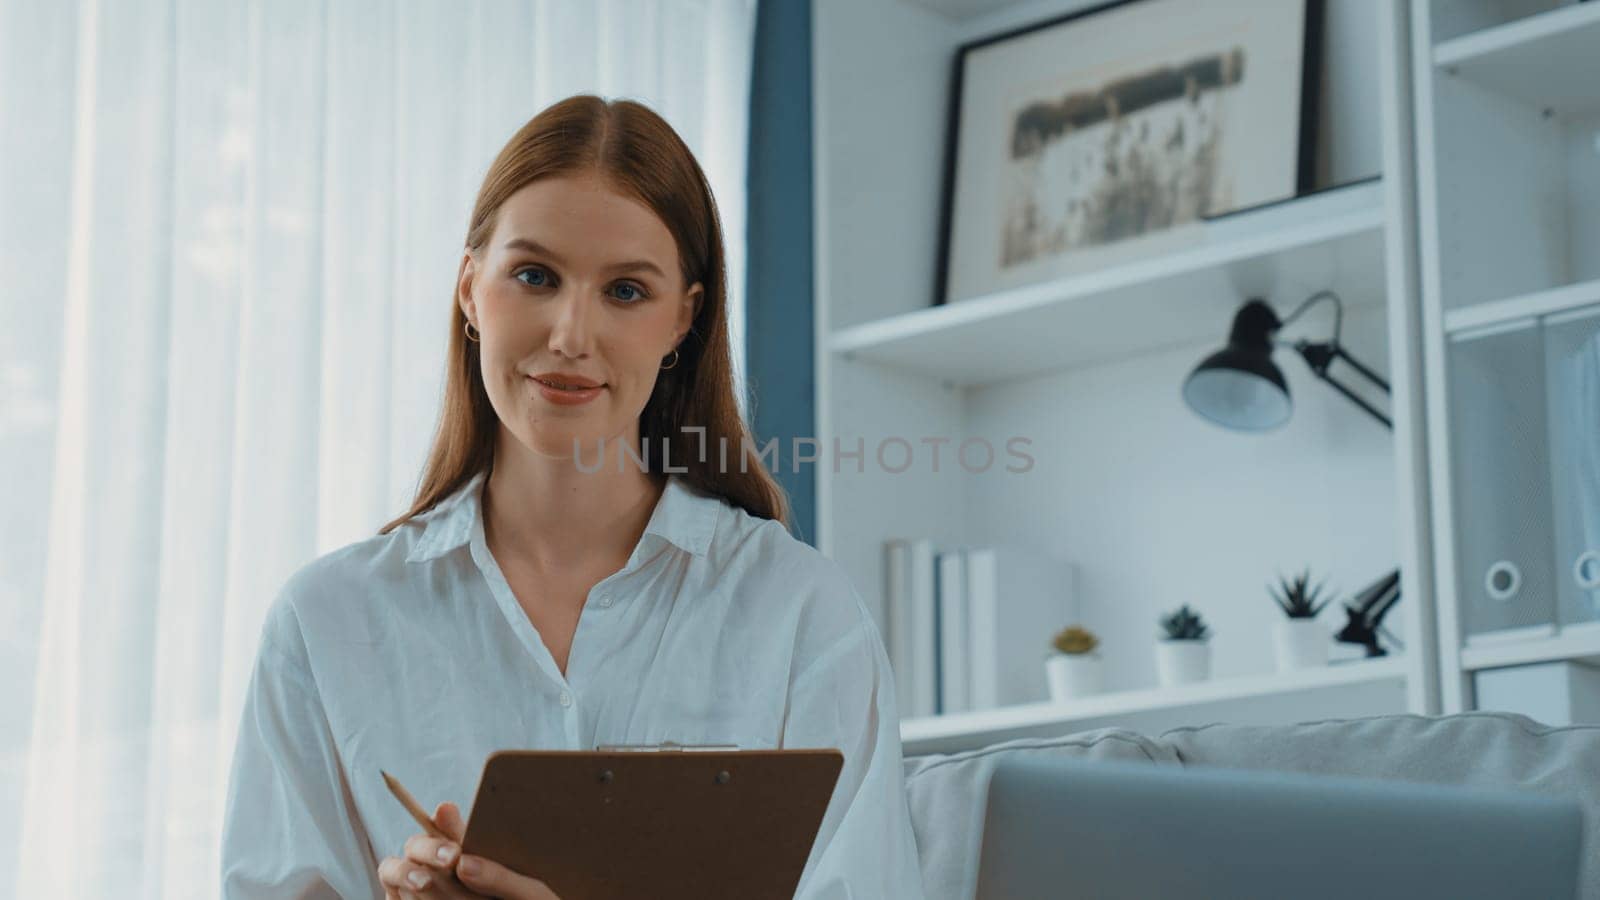 Friendly psychologist woman in clinic office professional portrait with smile and holding clipboard for patient to visit psychologist. The experienced and prim confident psychologist